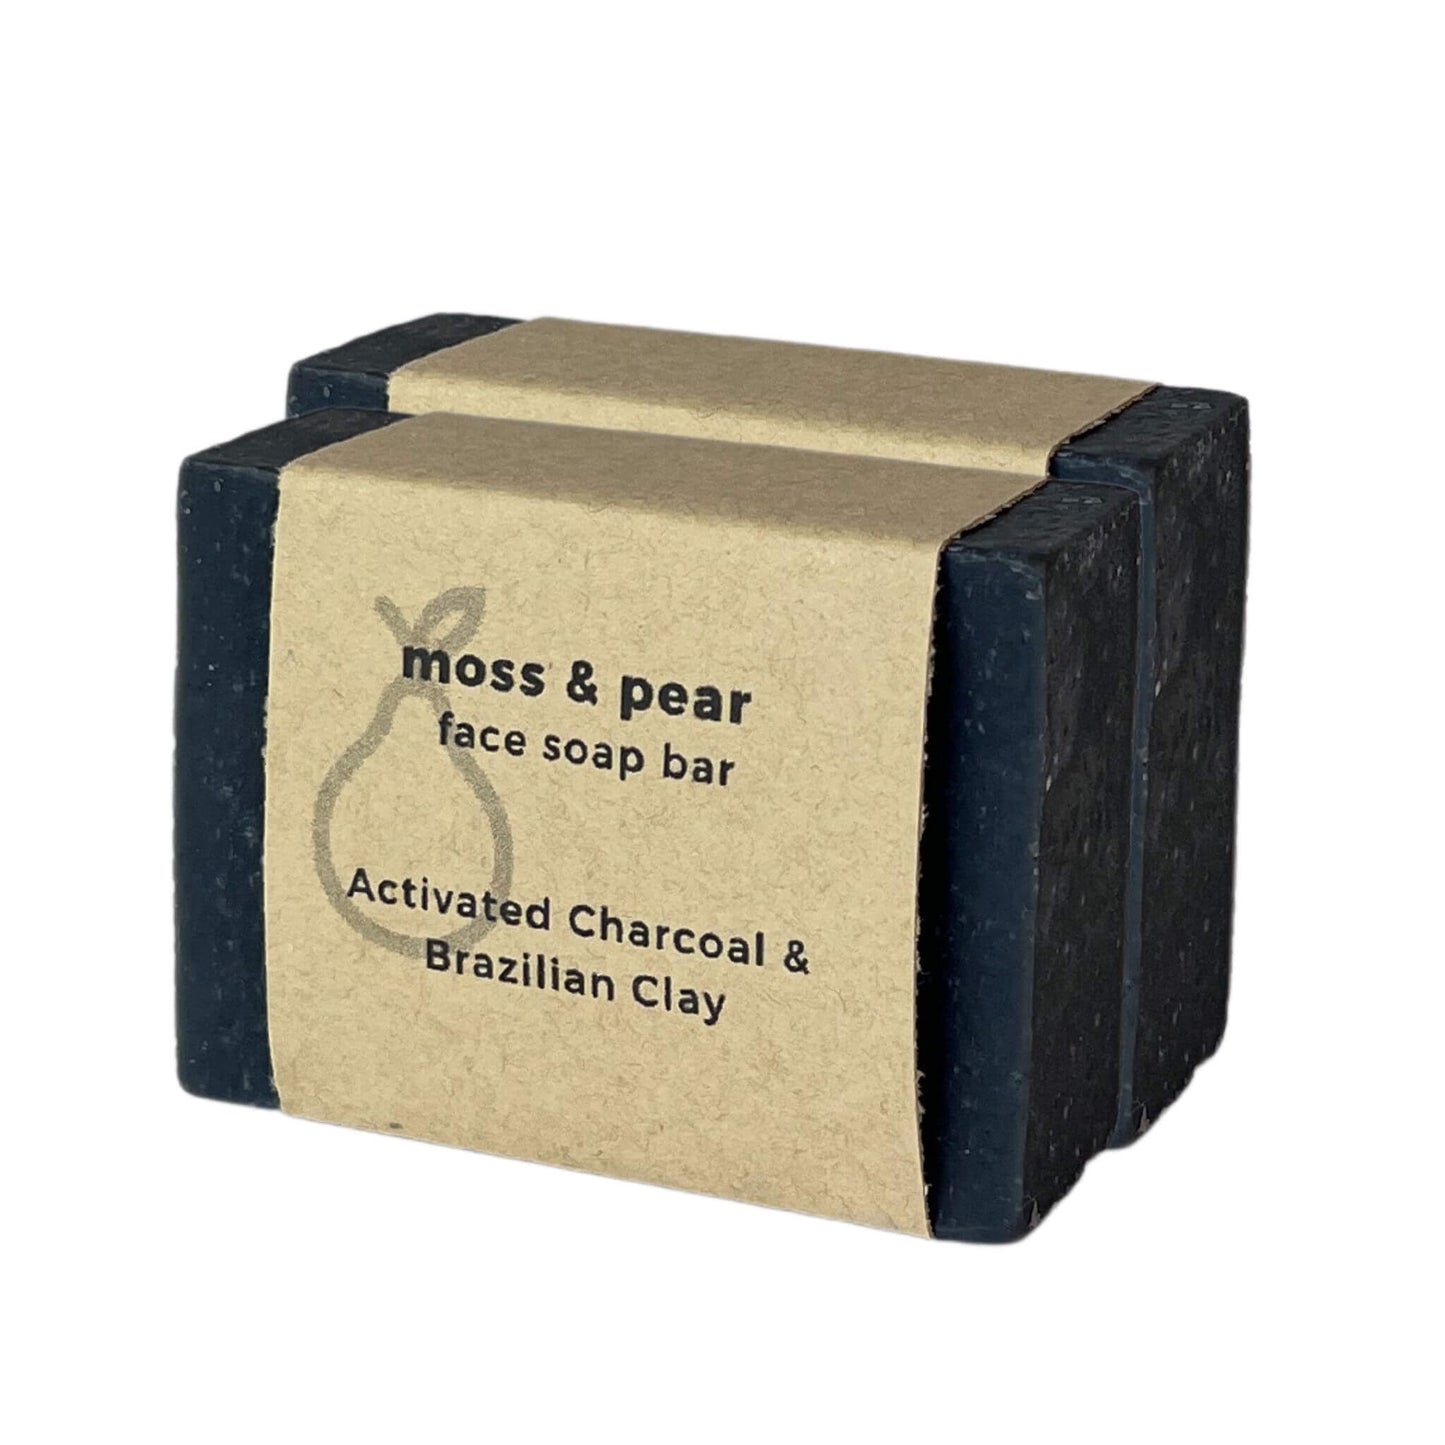 Face Soap Bar Activated Charcoal & Brazilian Clay with label 2 bars